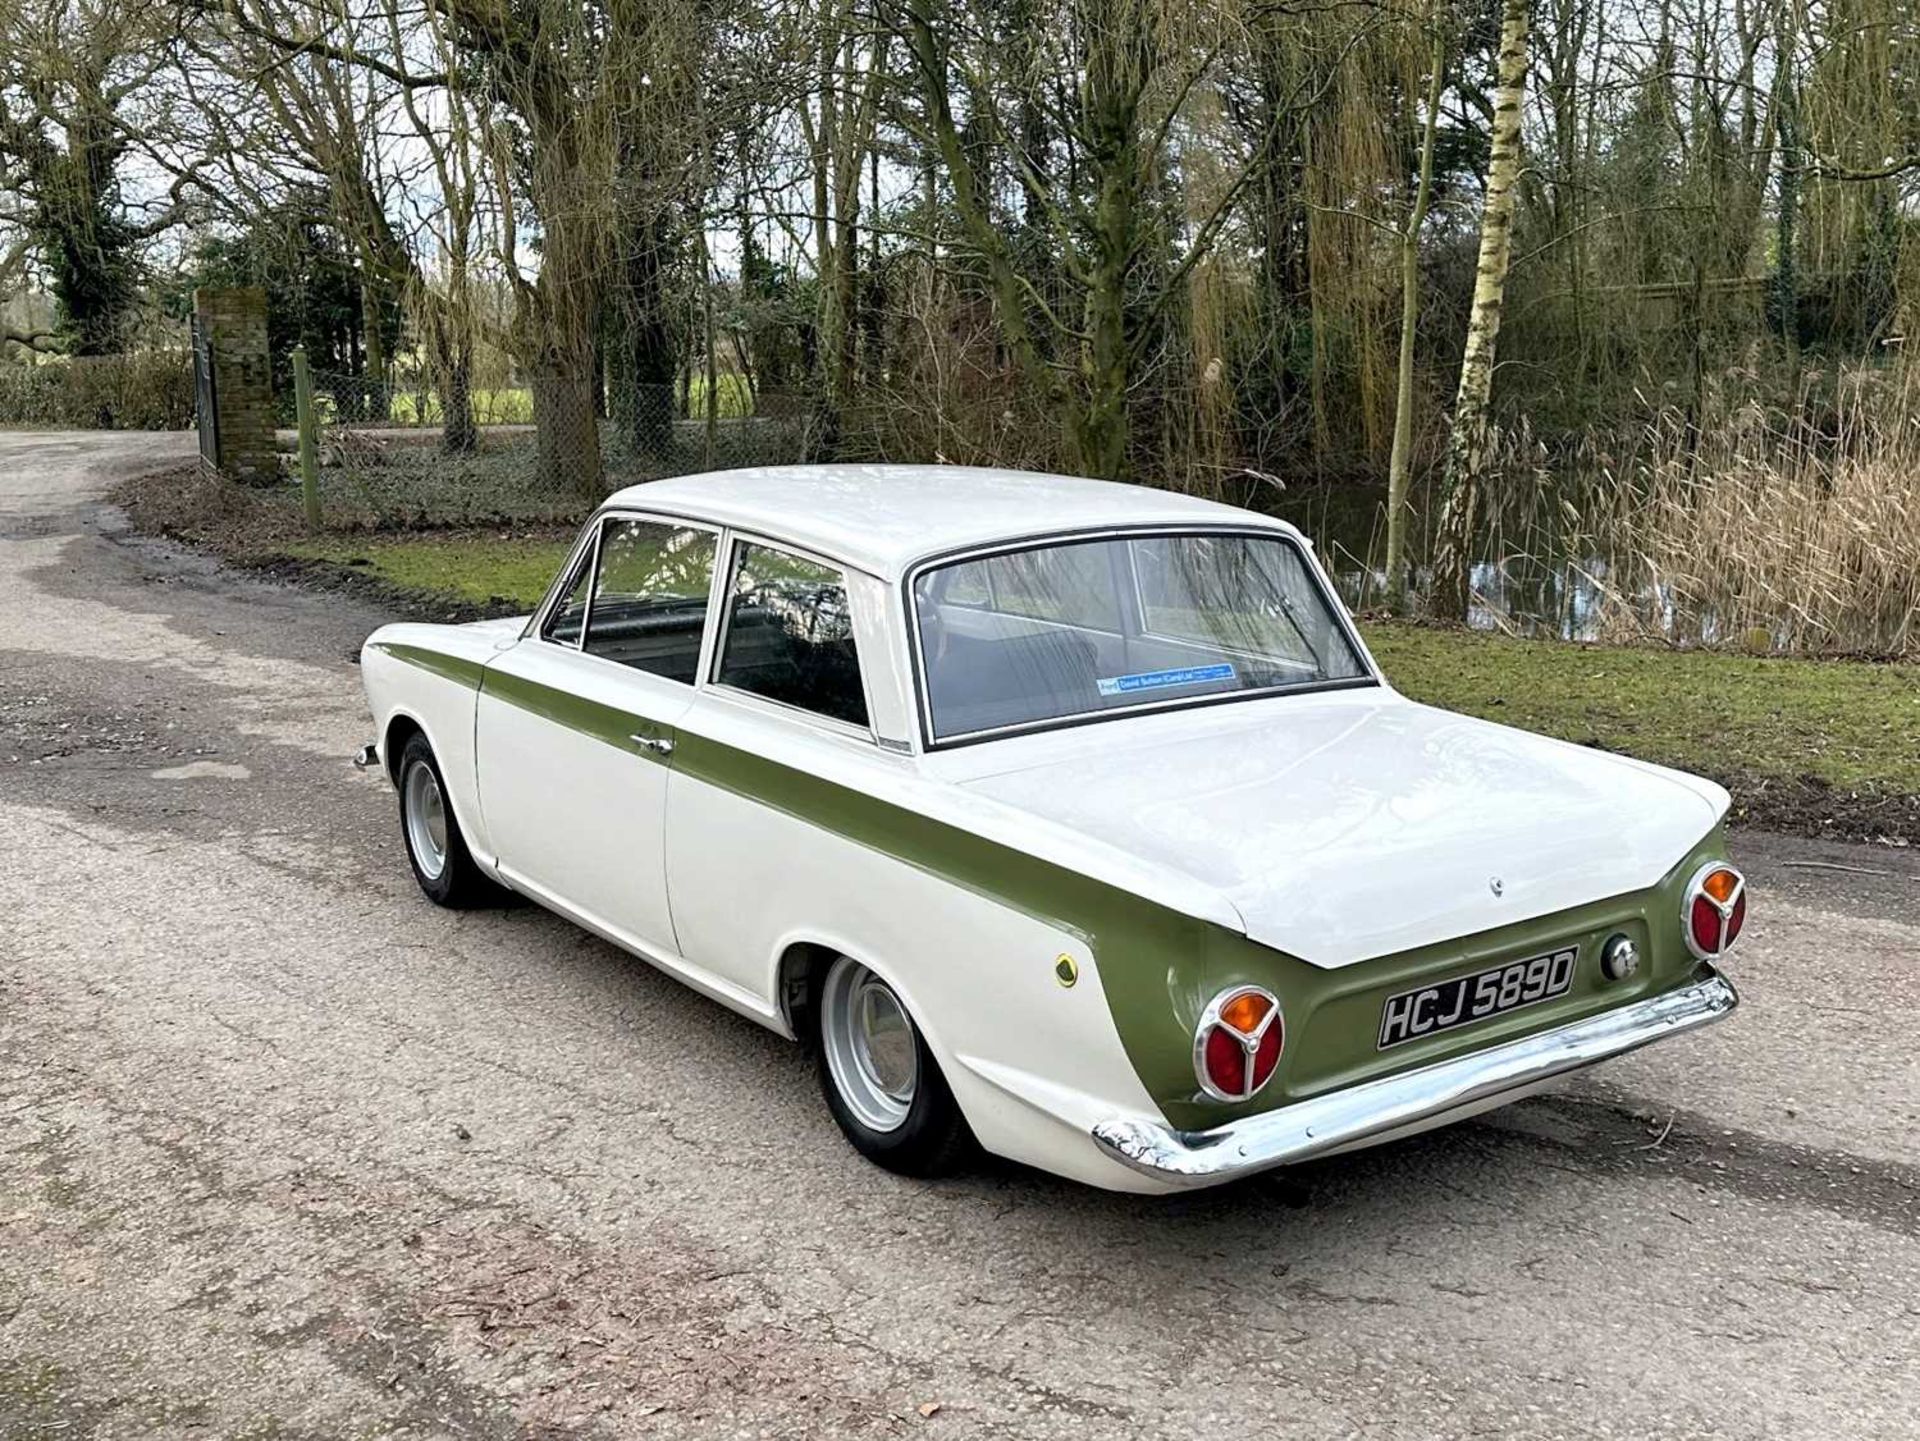 1963 Ford Lotus Cortina Pre-Aeroflow model, fitted with A-frame rear suspension - Image 21 of 58